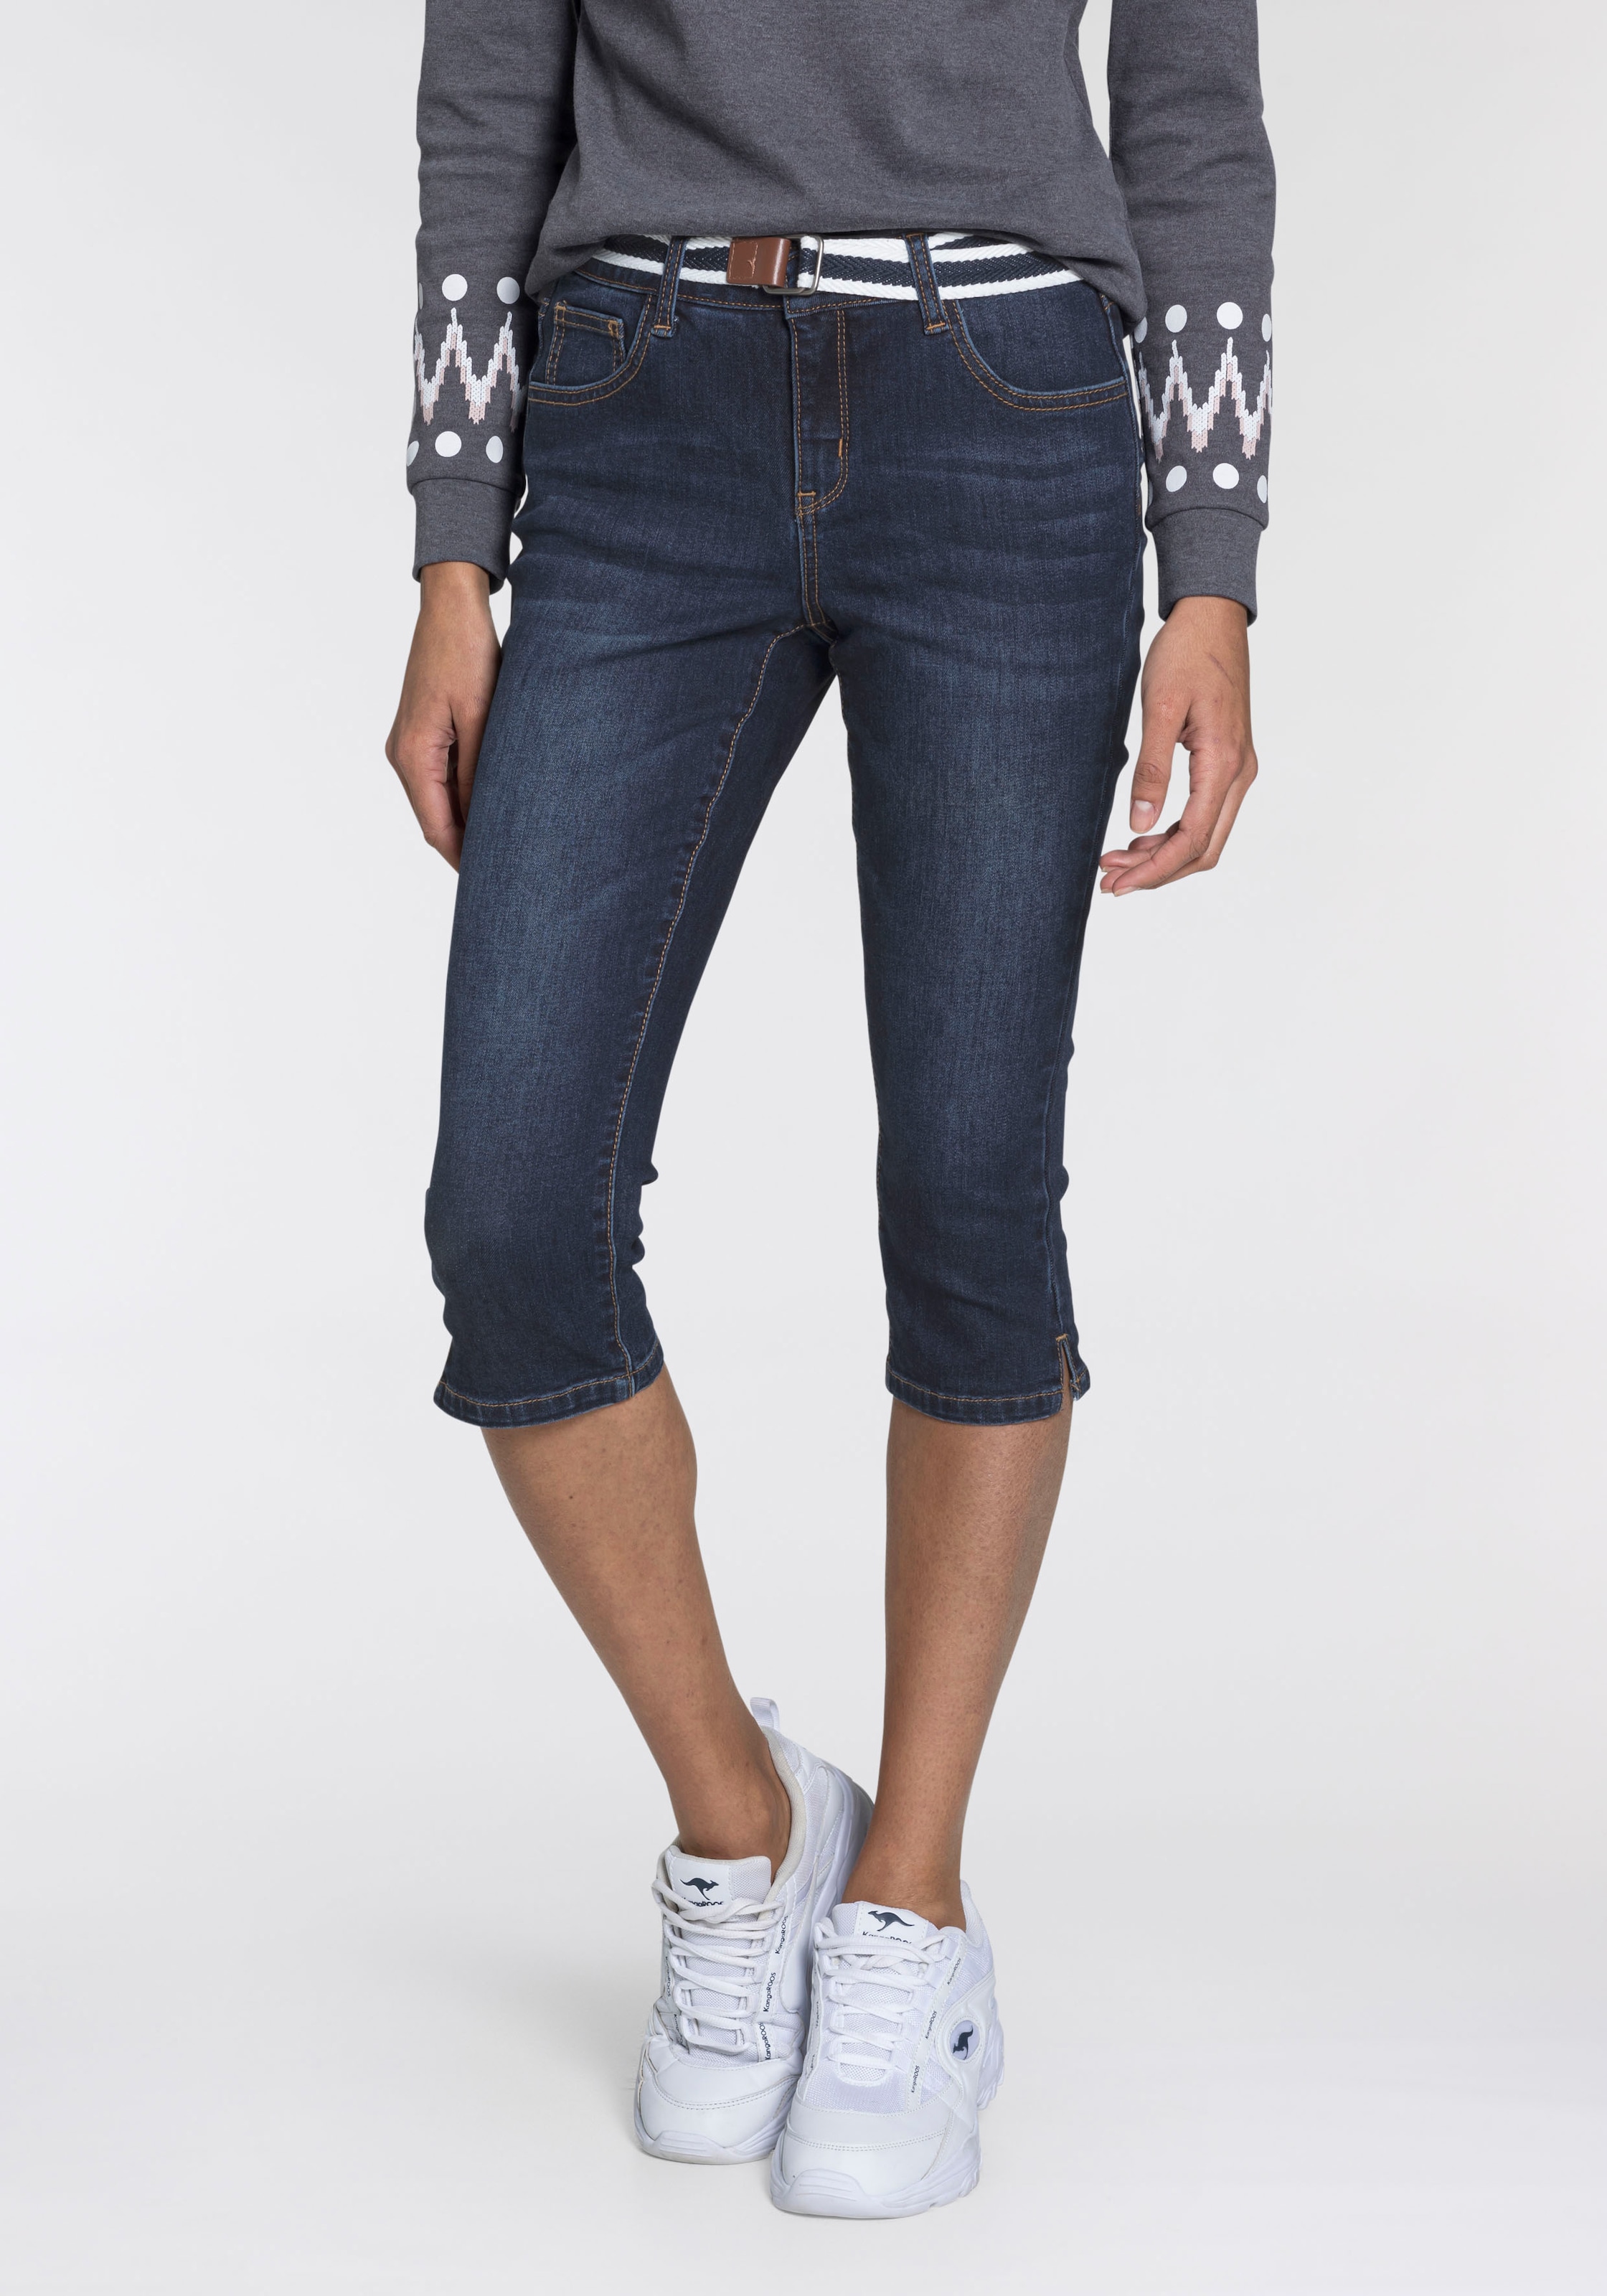 Damen Kleidung Jeans Cropped Jeans XS Coole weiße Capri Jeans in Gr 